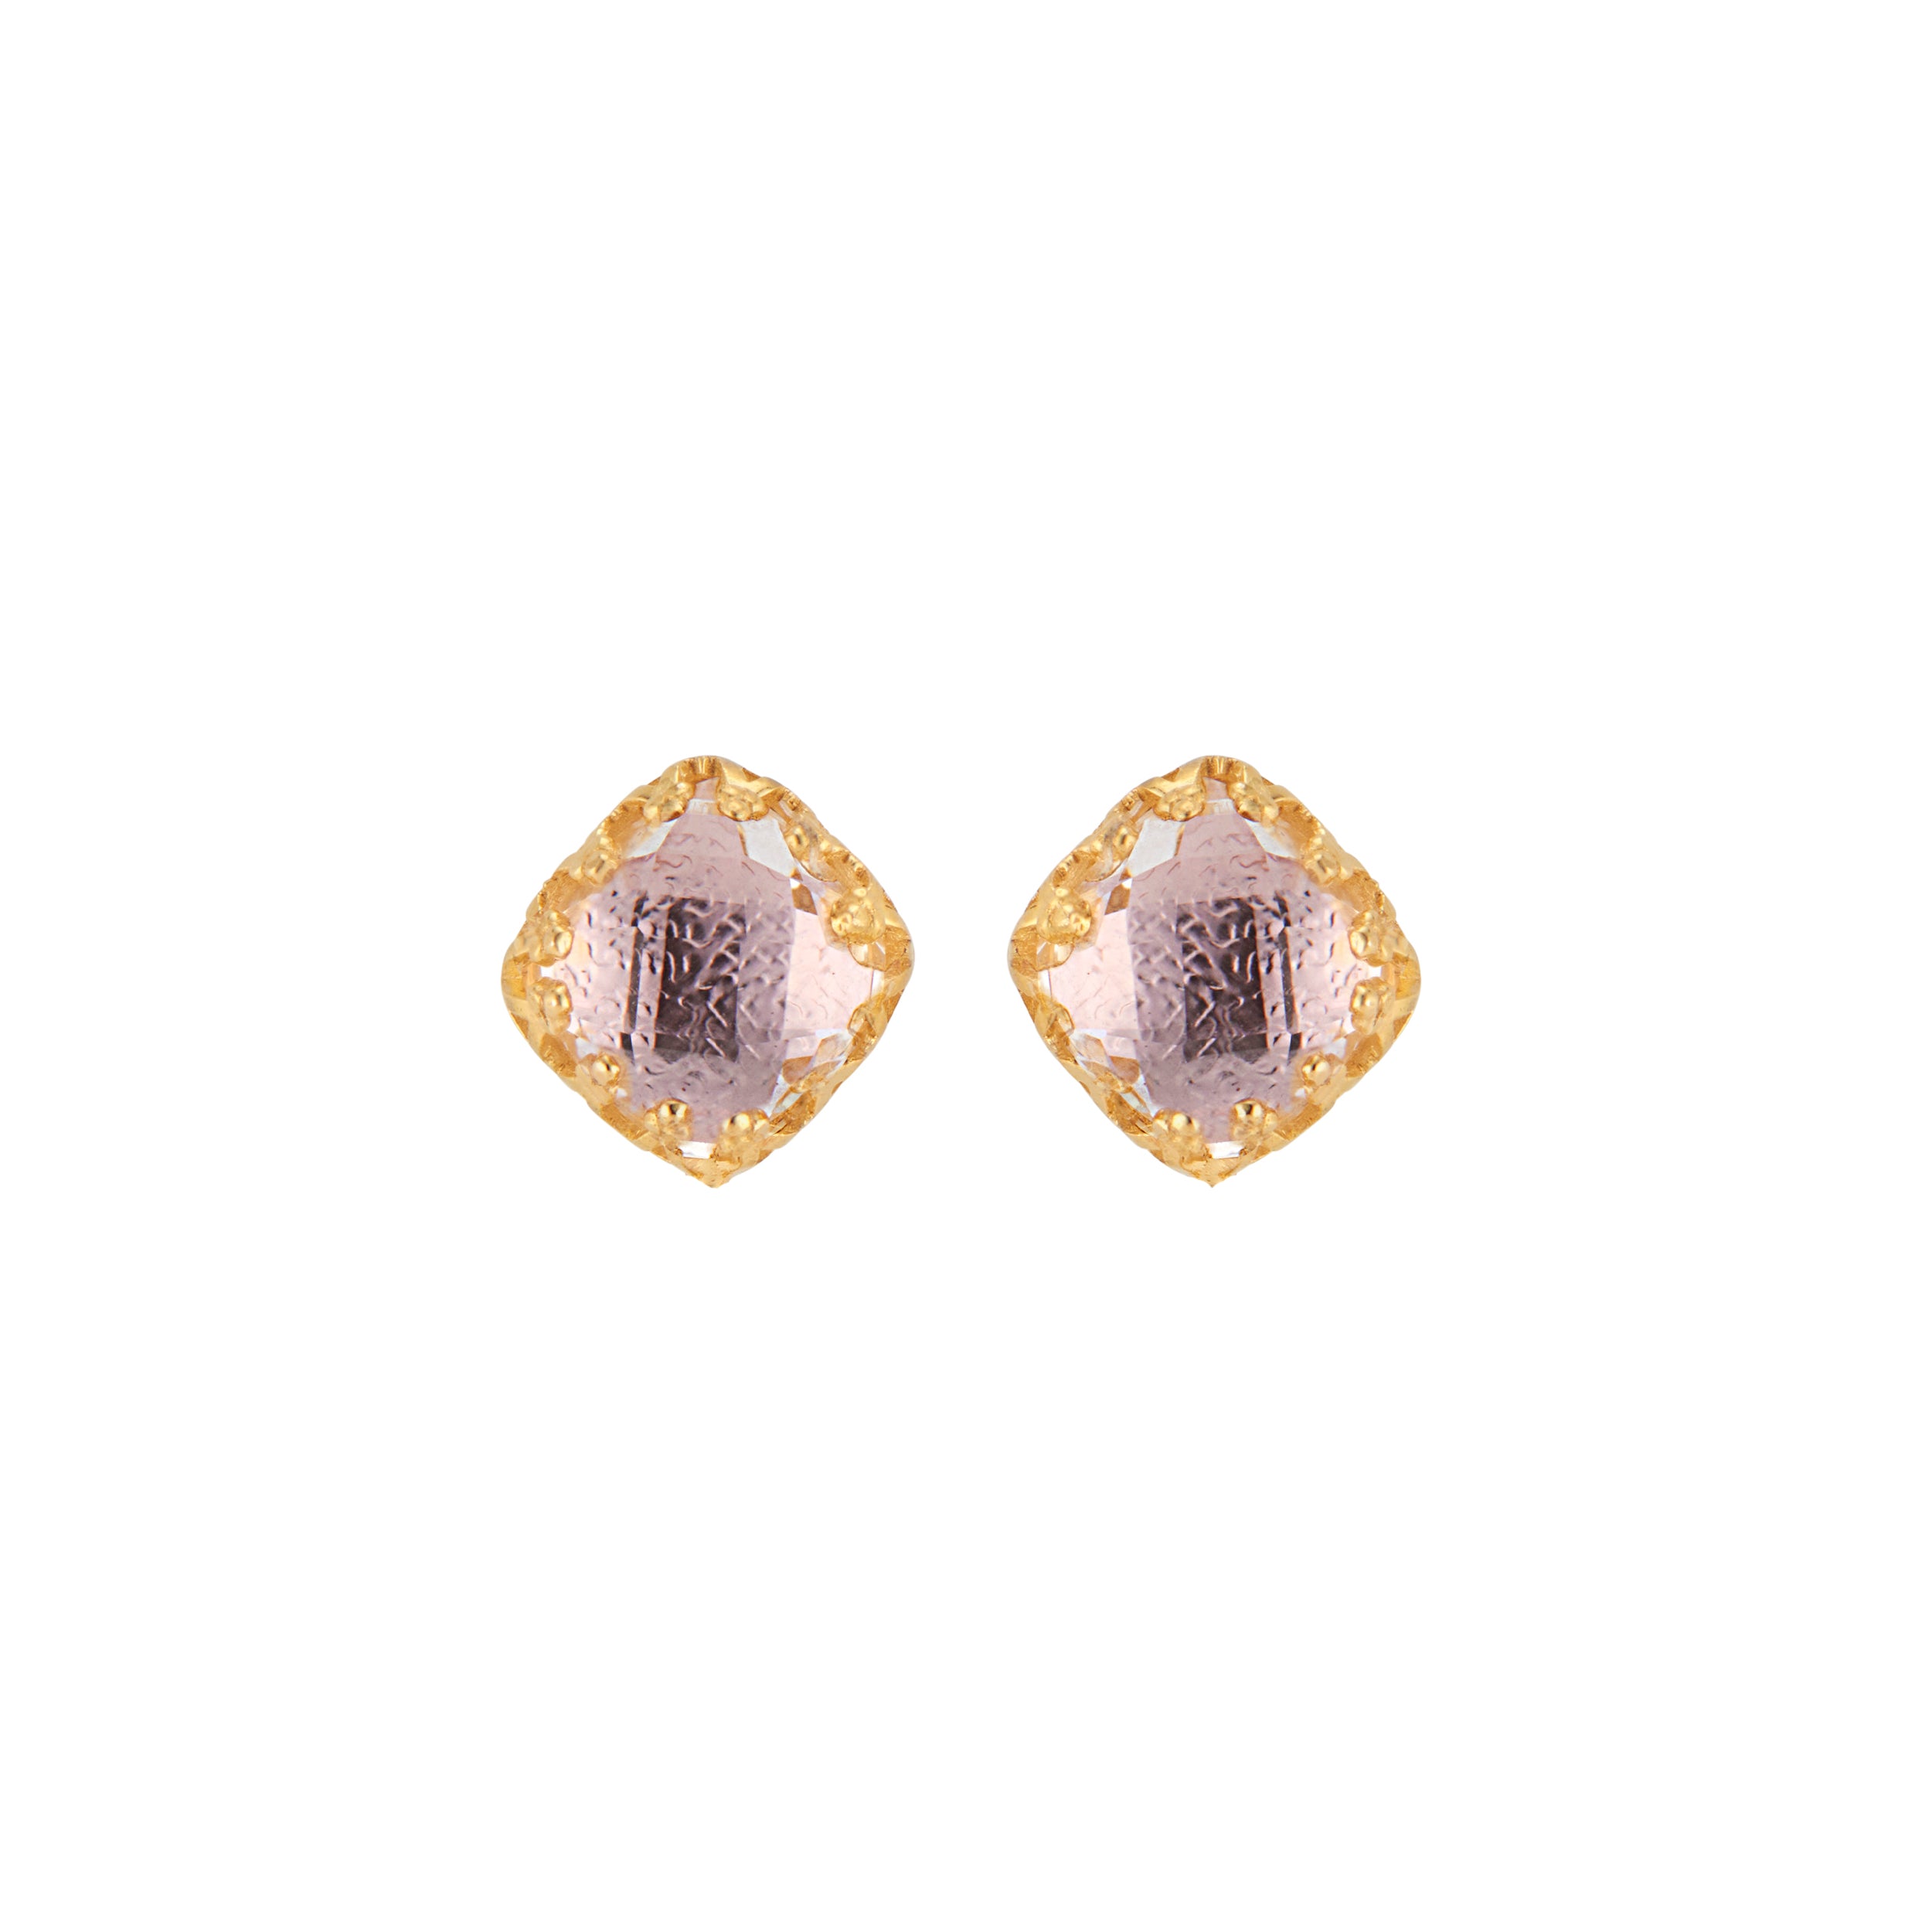 Jane Small Post Earrings (Black Rhodium or Yellow Gold Wash)